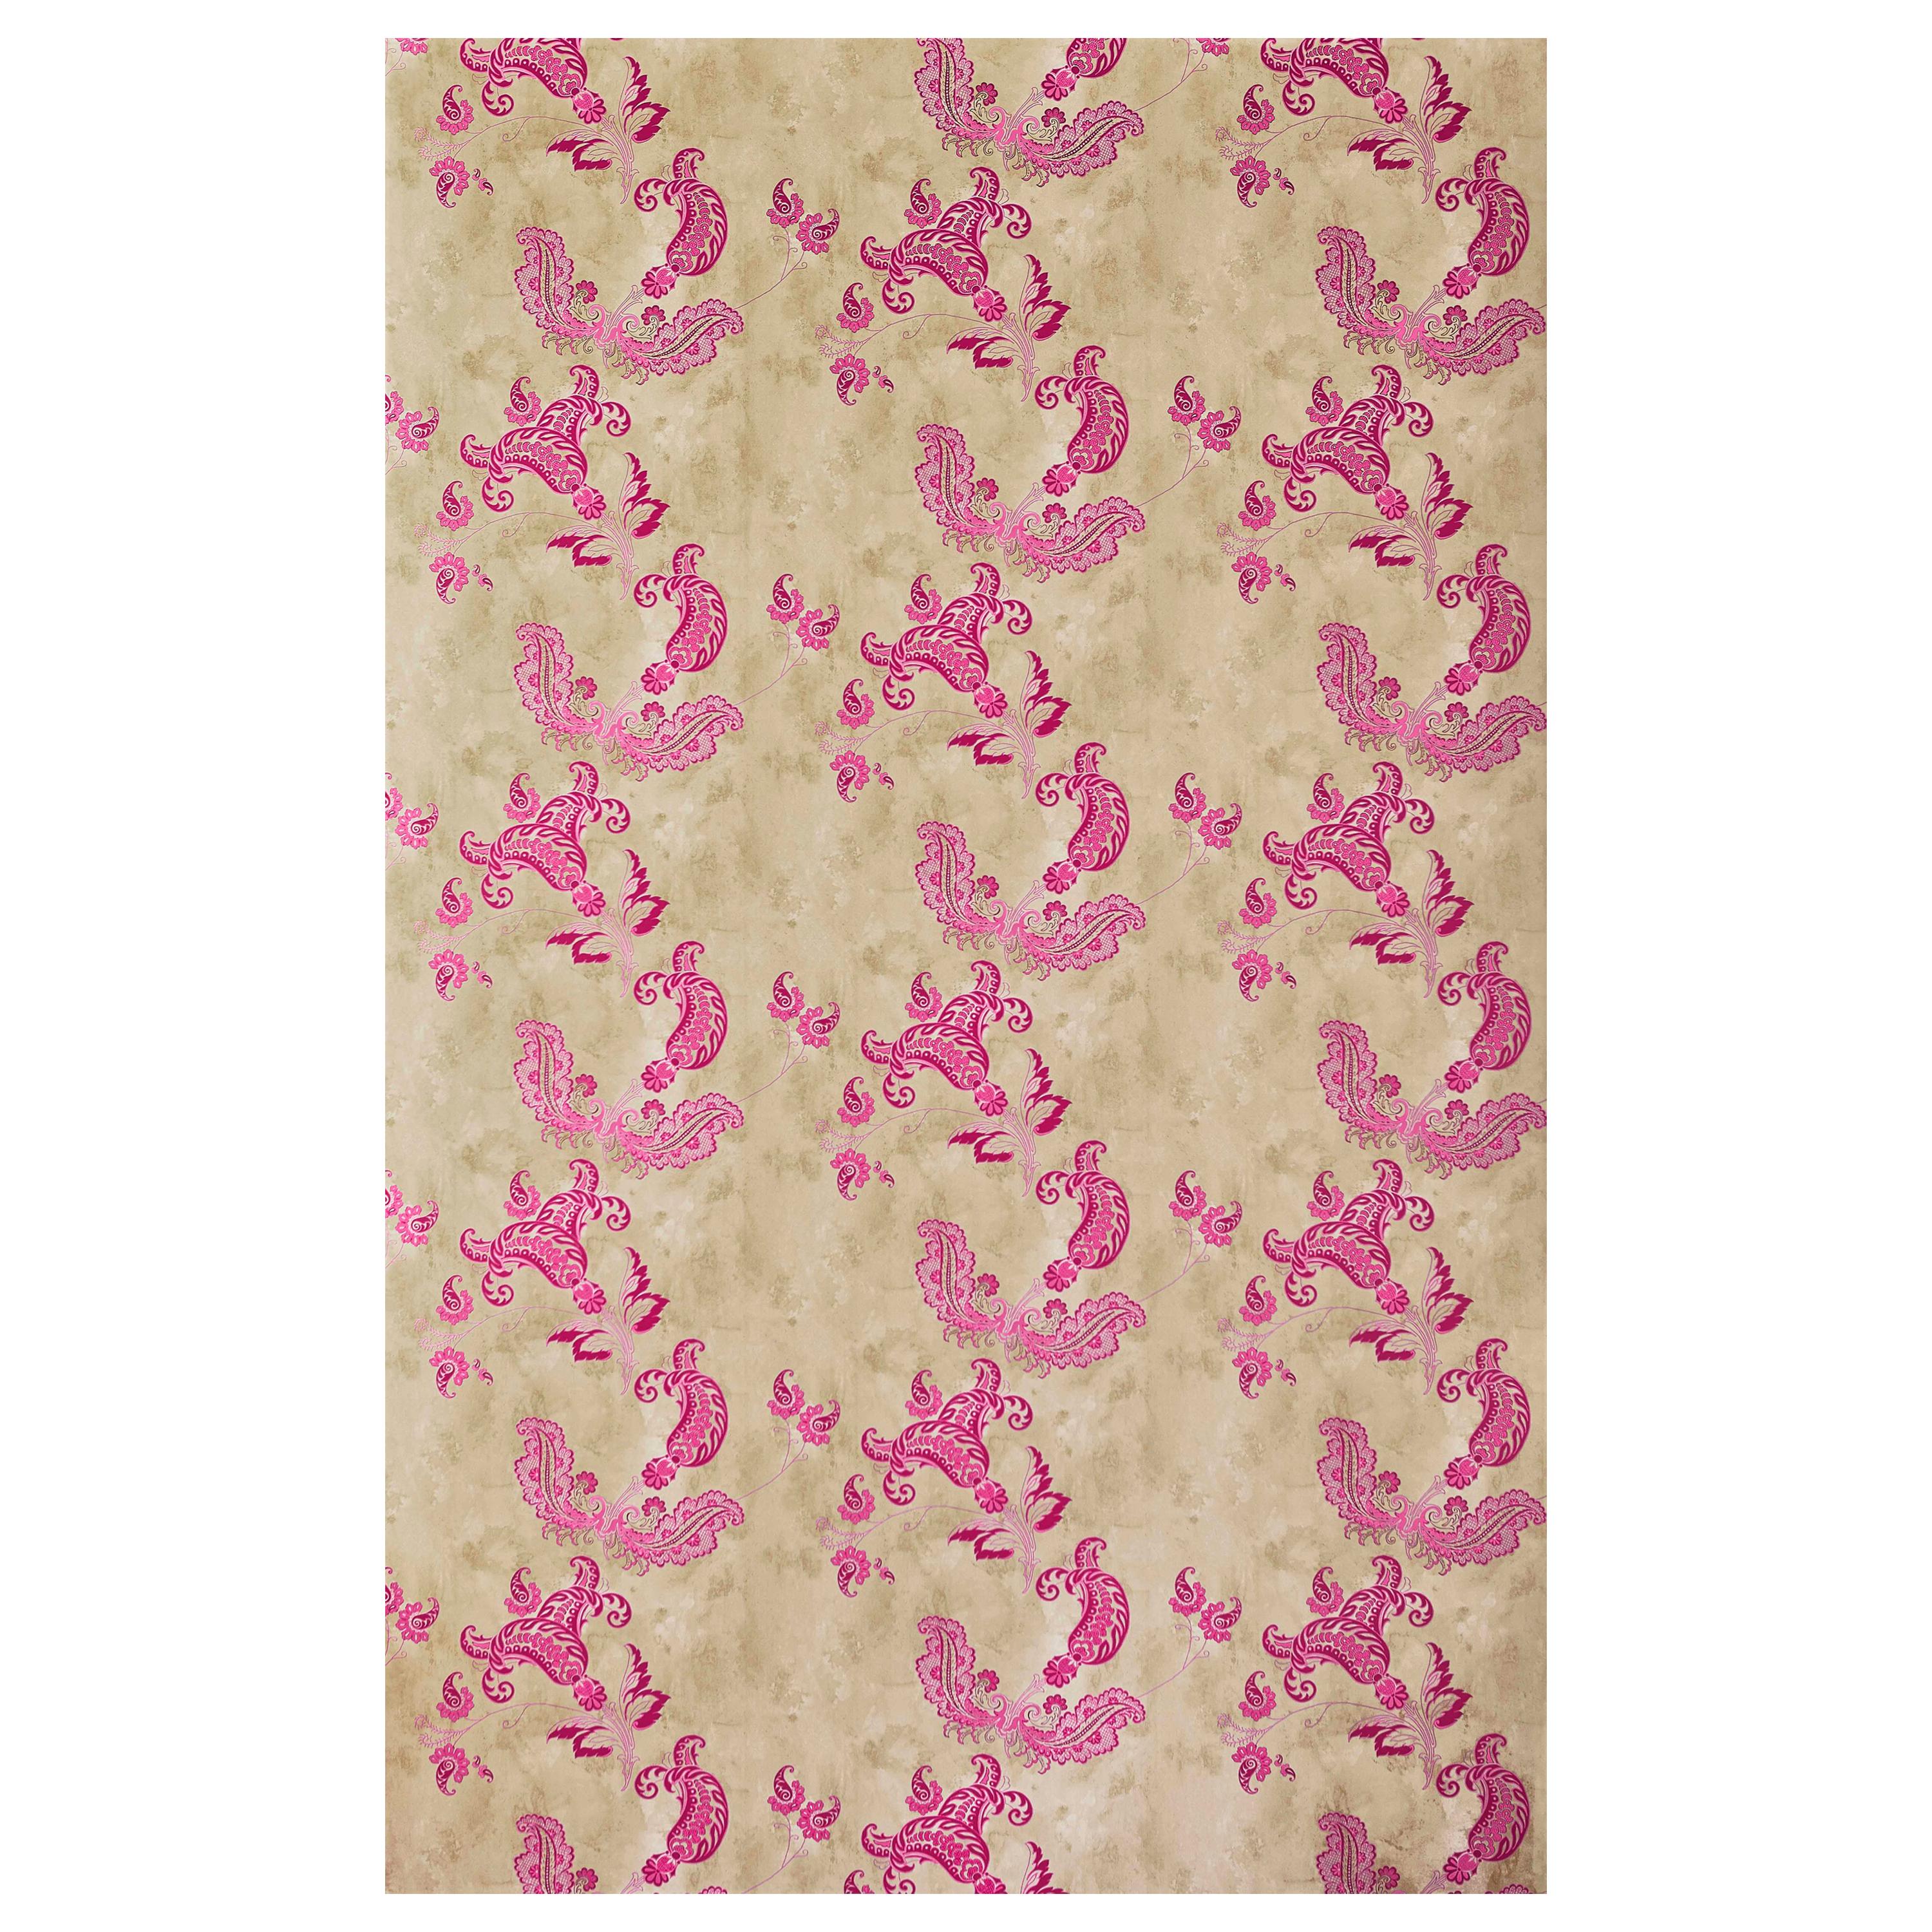 'Paisley' Contemporary, Traditional Wallpaper in Hot Pink on Tea Stain For Sale